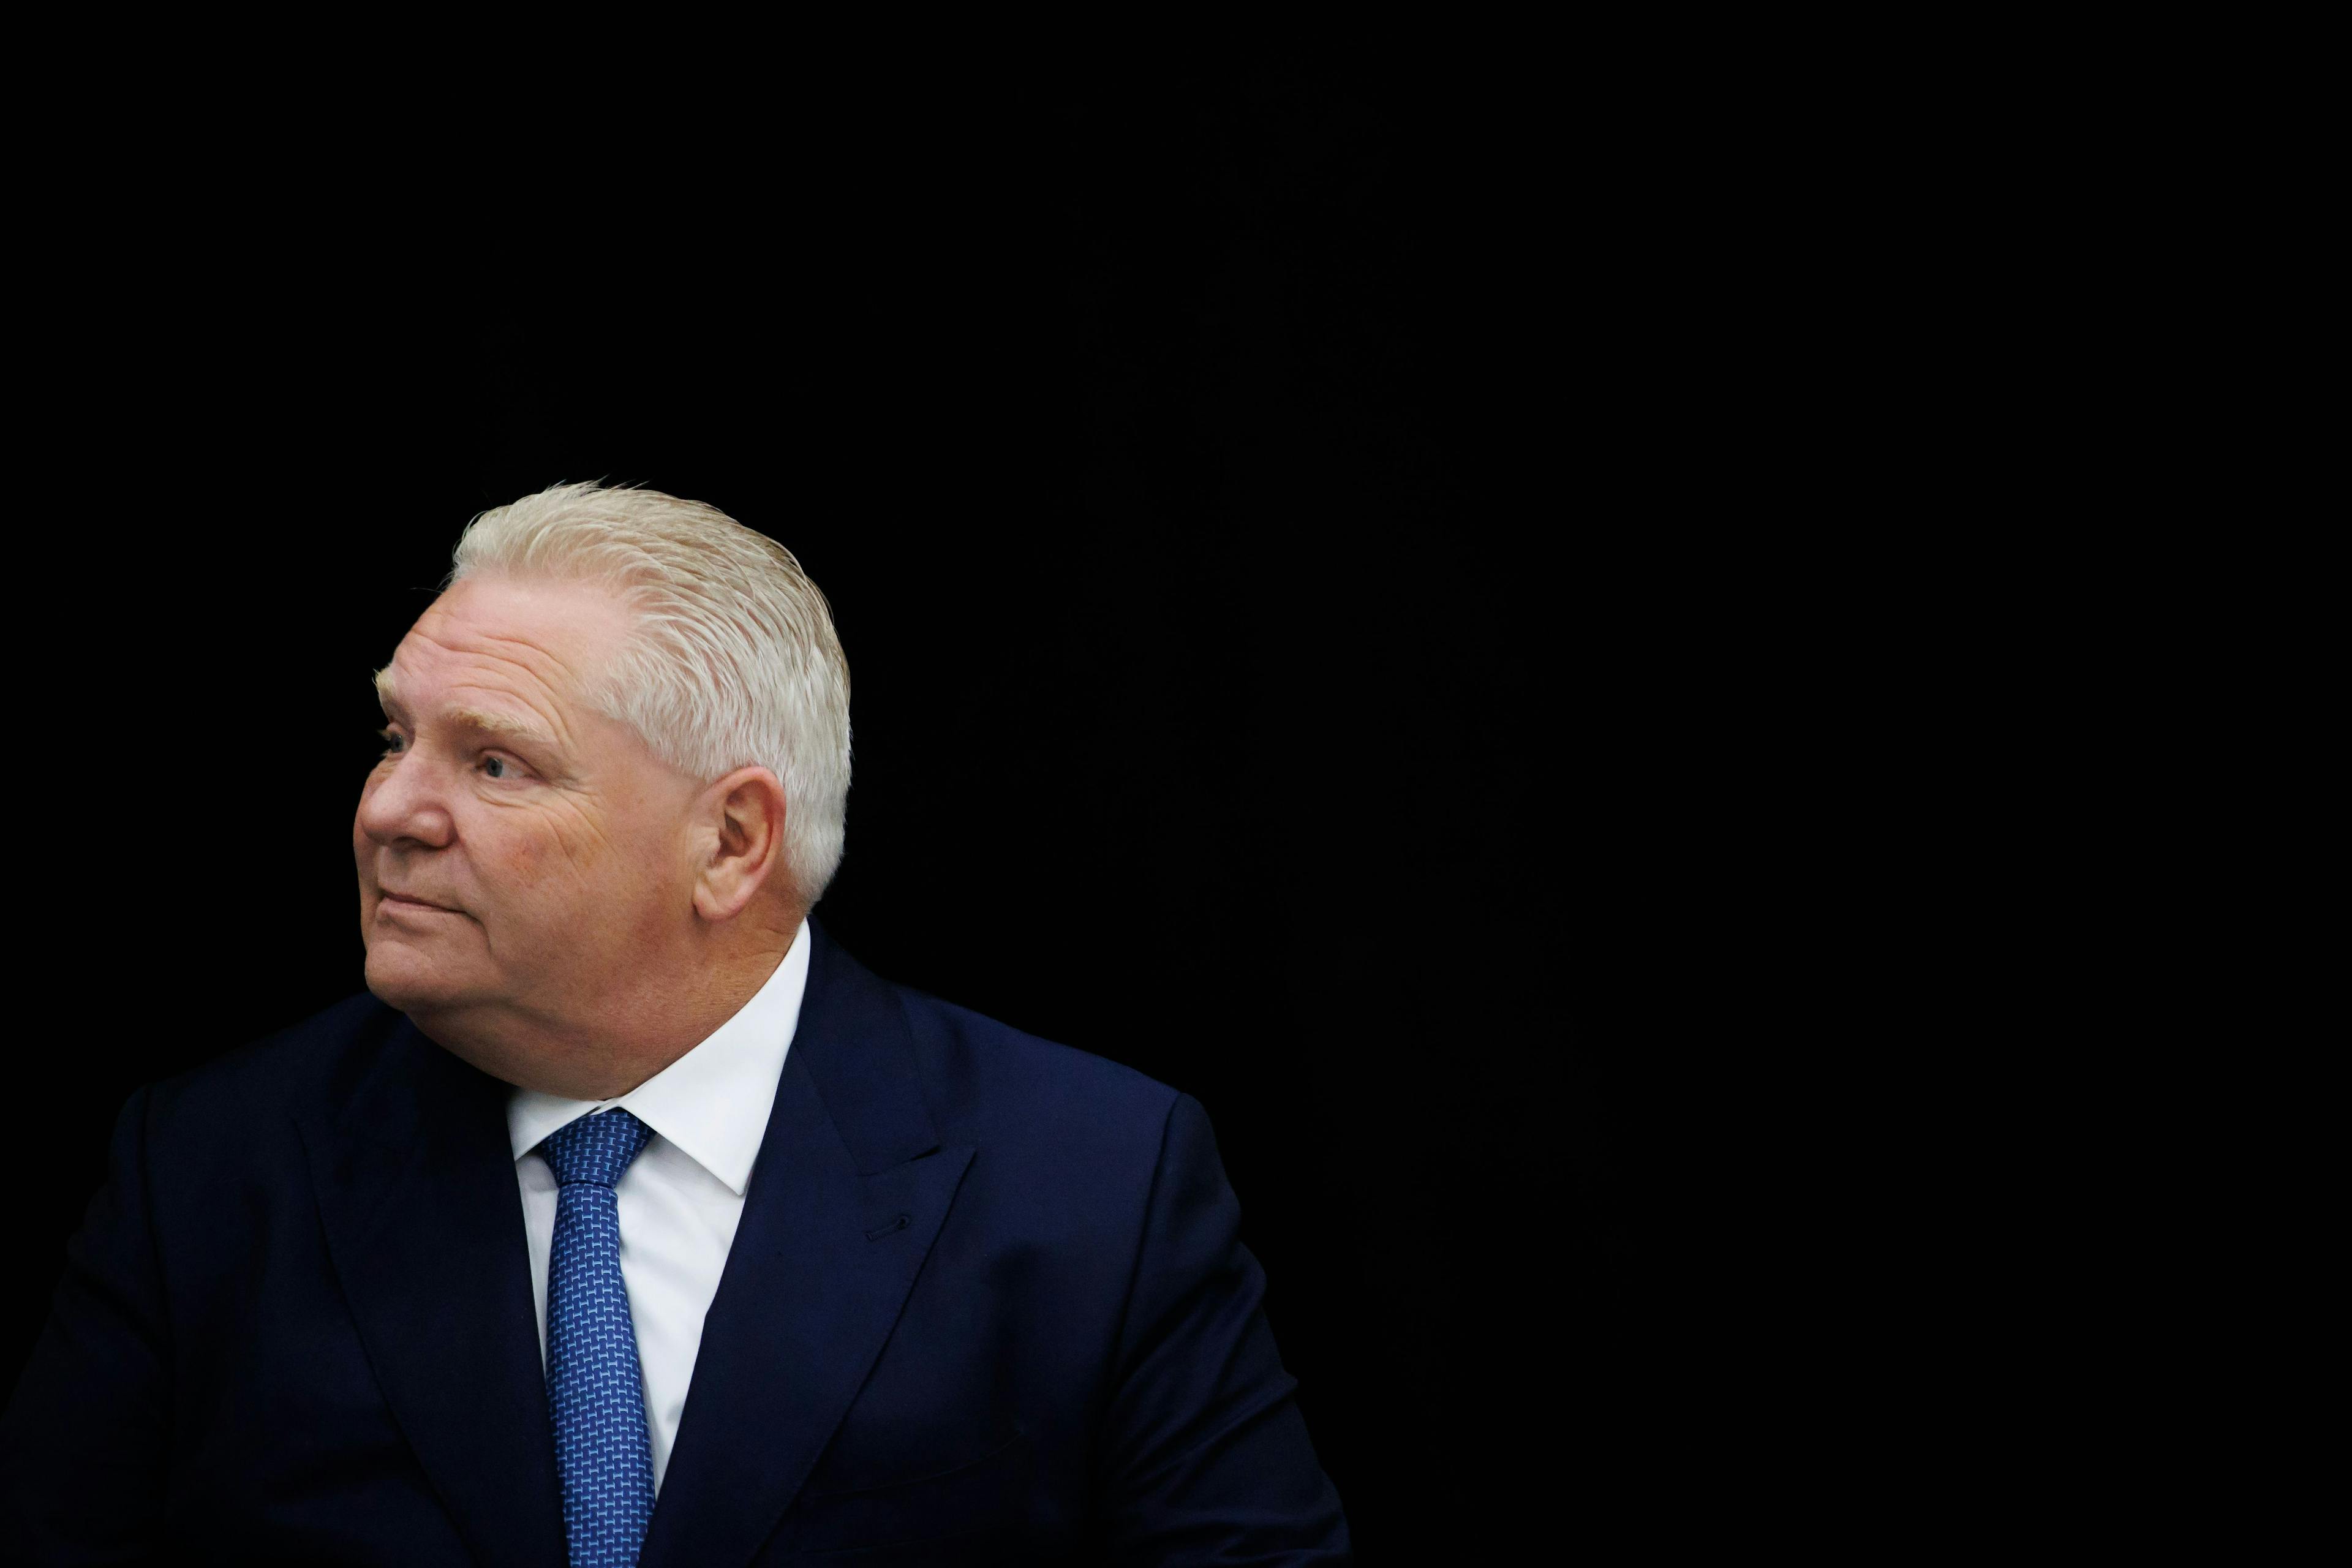 Premier Ford rules out fourplex construction as-of-right in Ontario despite taskforce recommendation